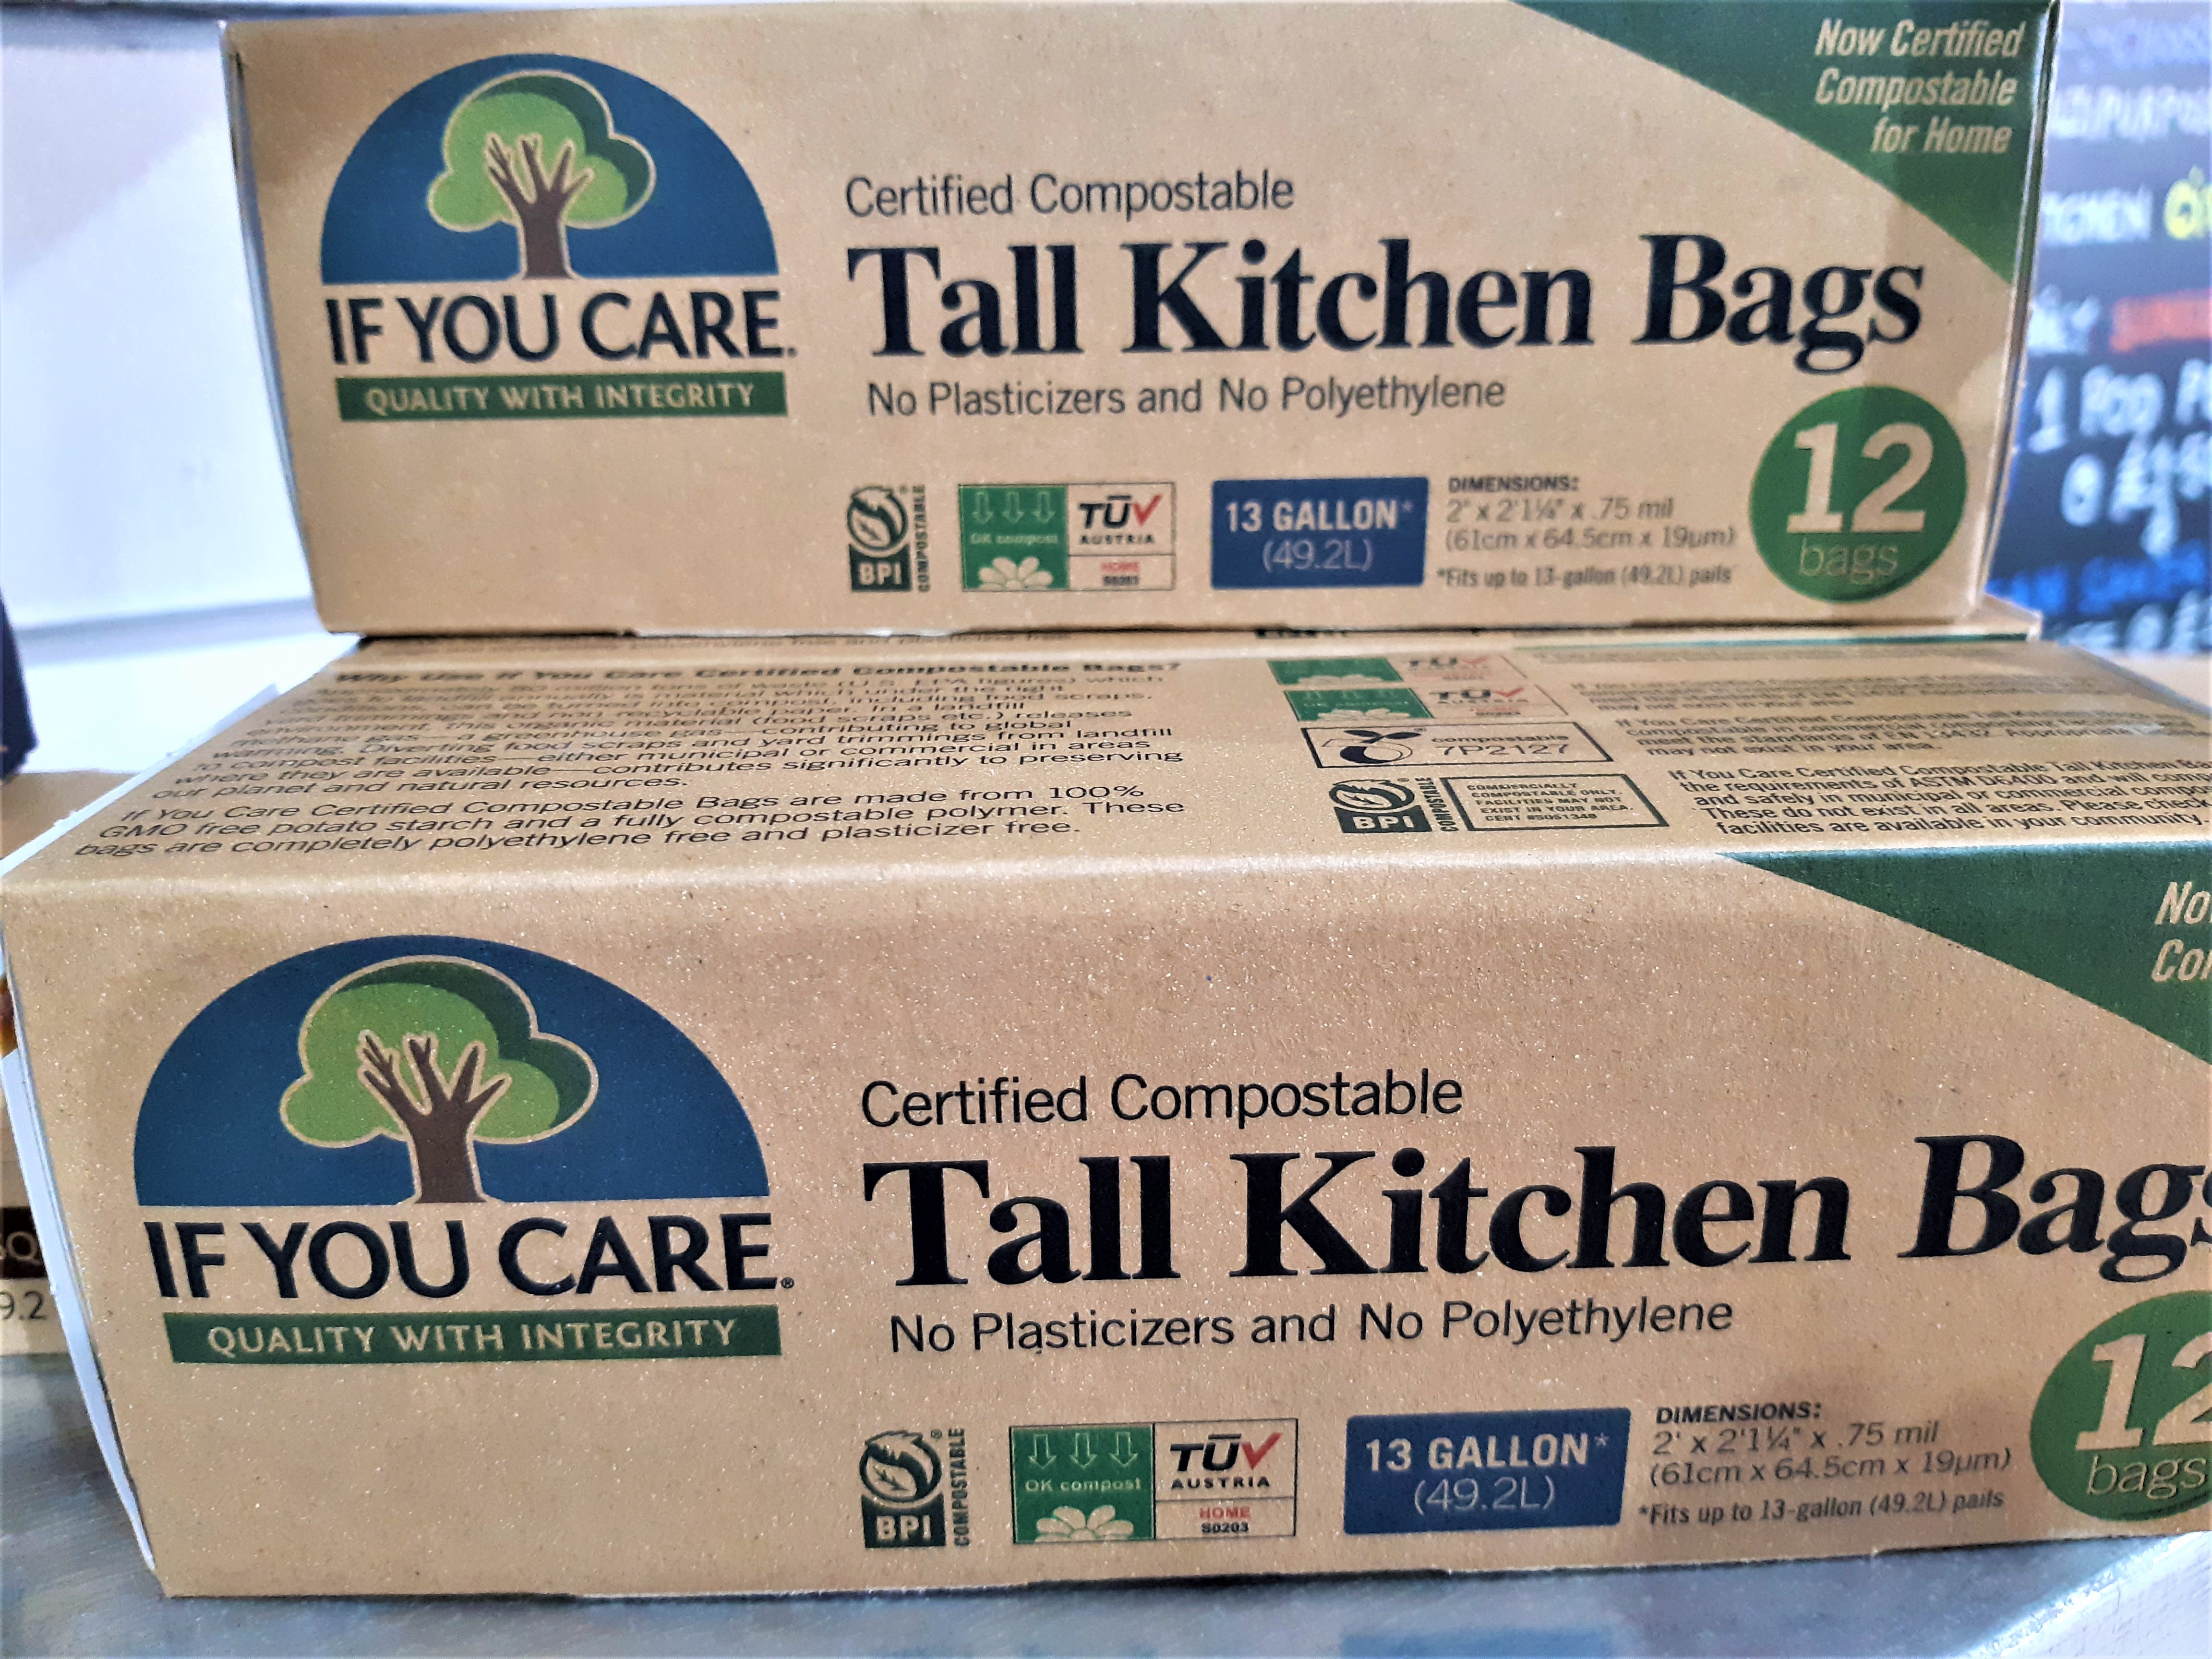 Compostable Tall Kitchen Garbage Bags, 13 Gallon